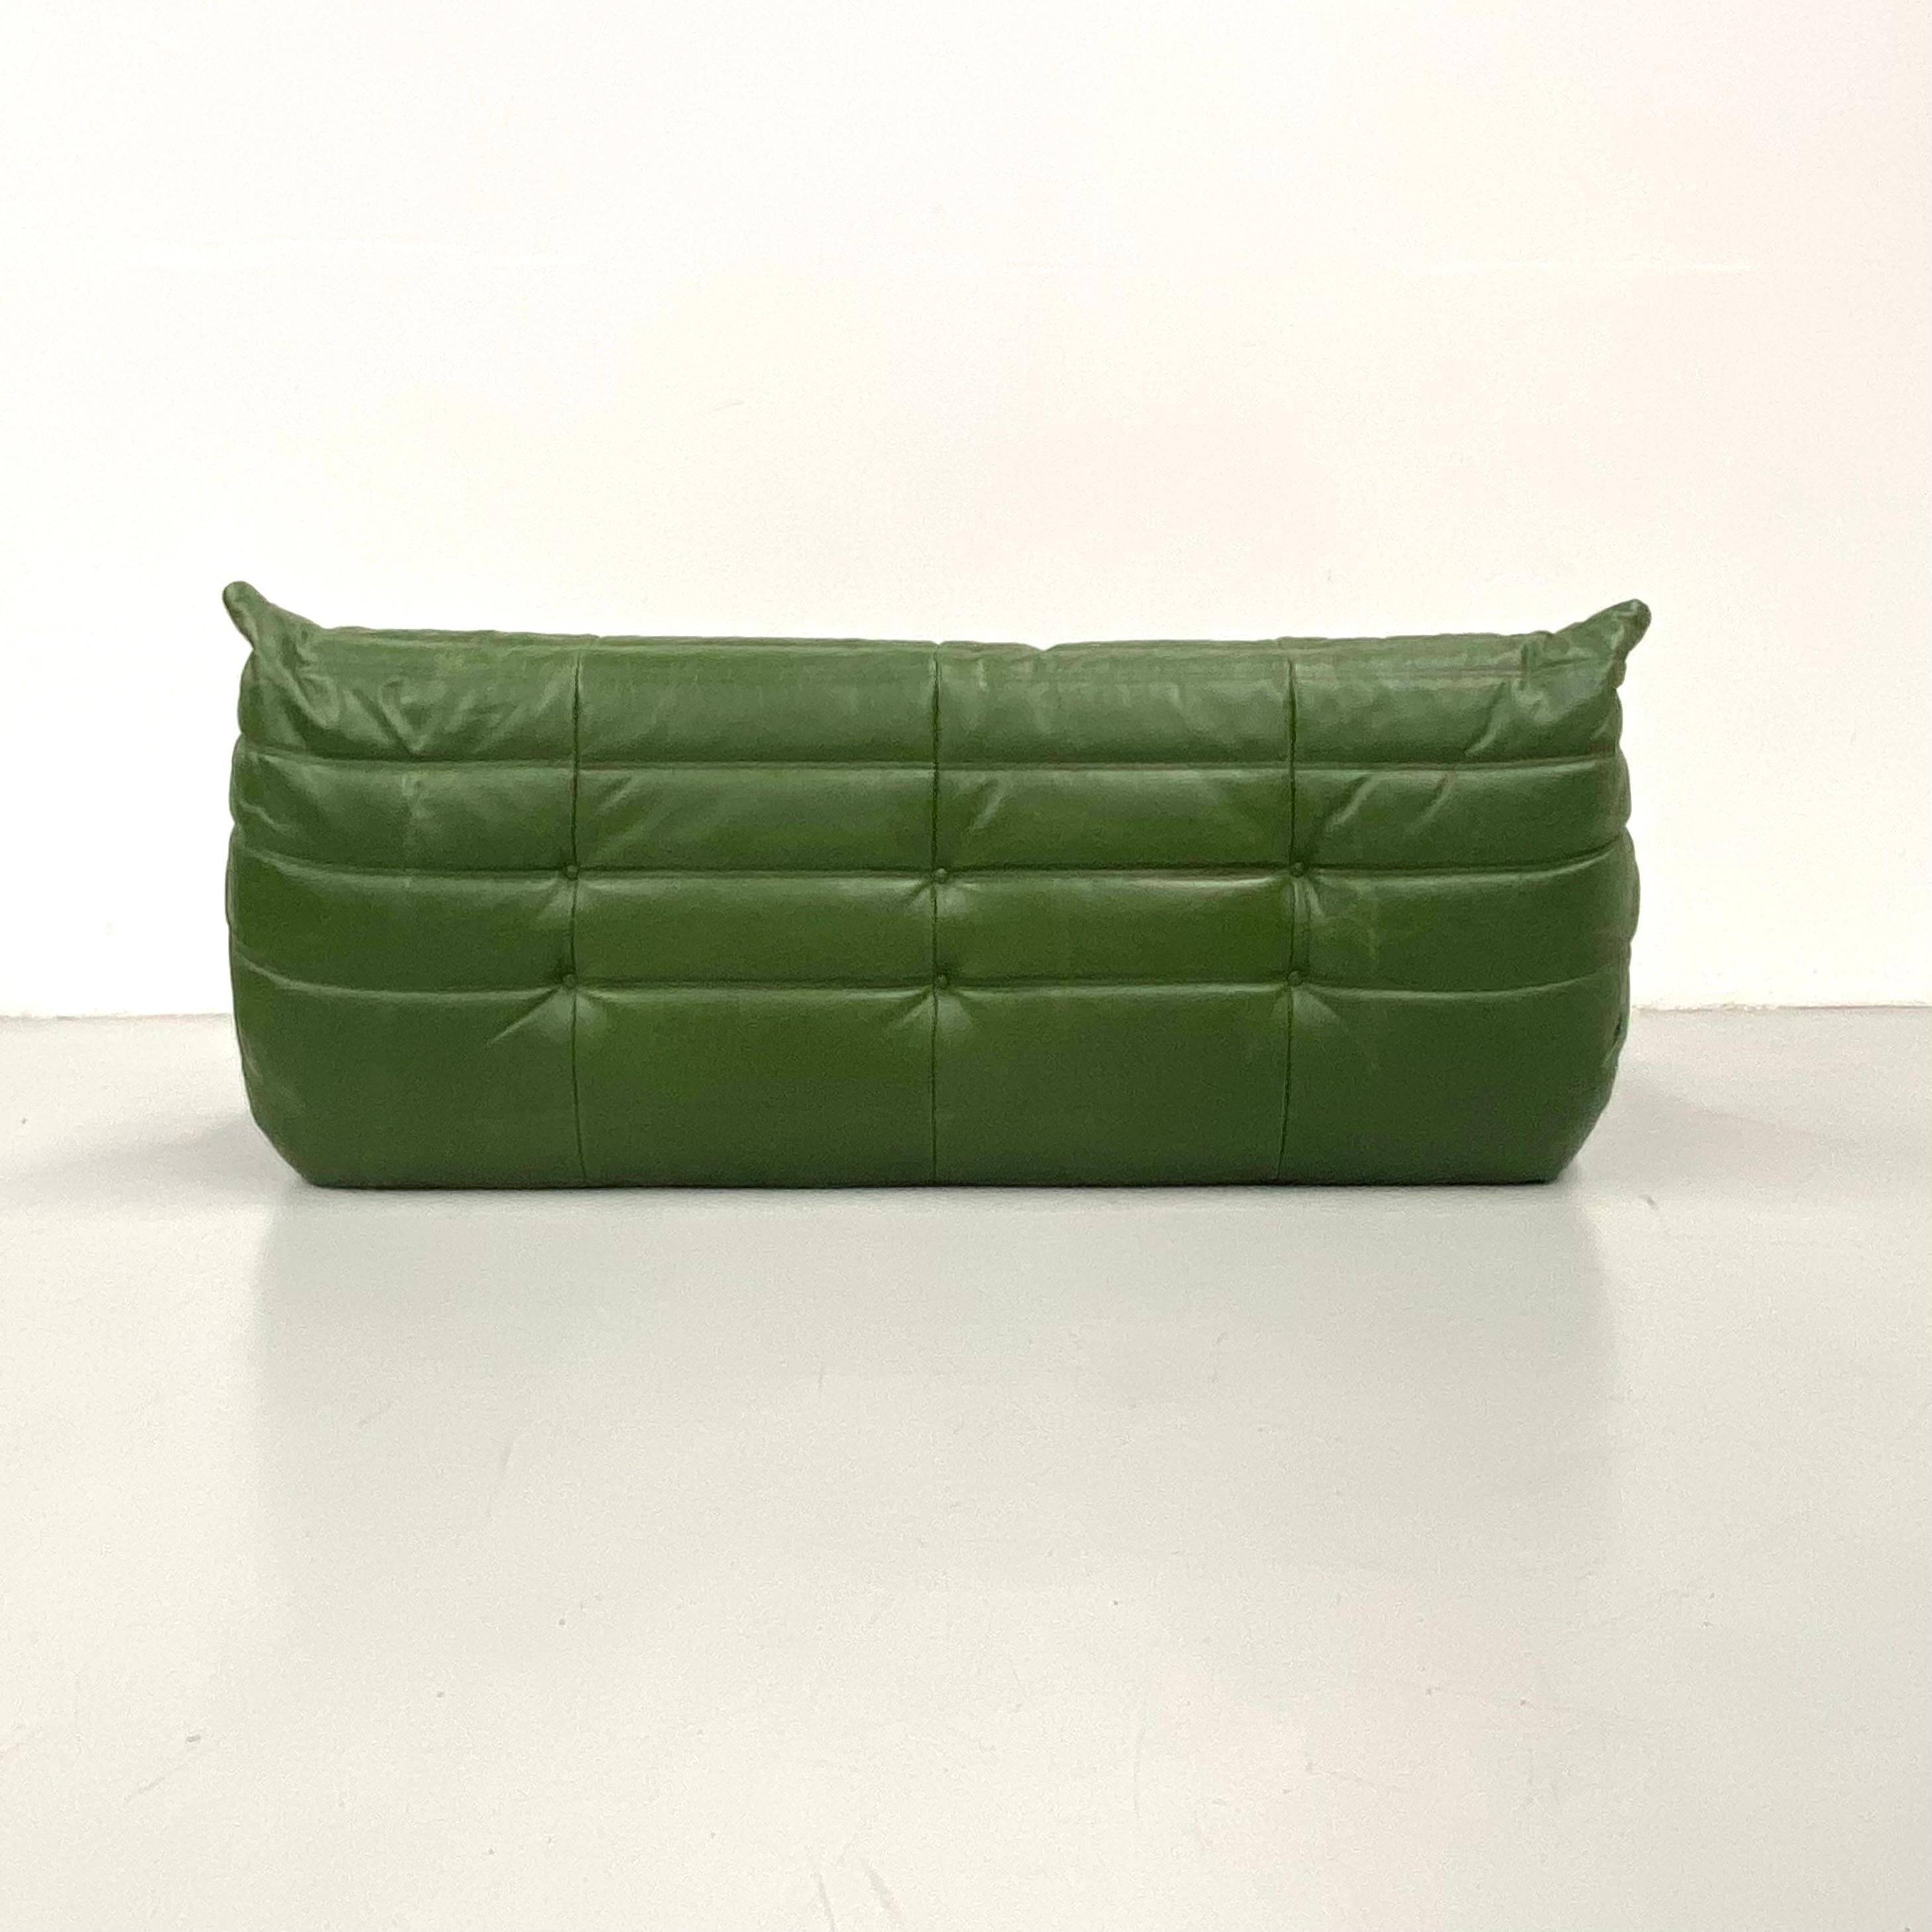 French Vintage Togo Sofa in Green  Leather by Michel Ducaroy for Ligne Roset. 9